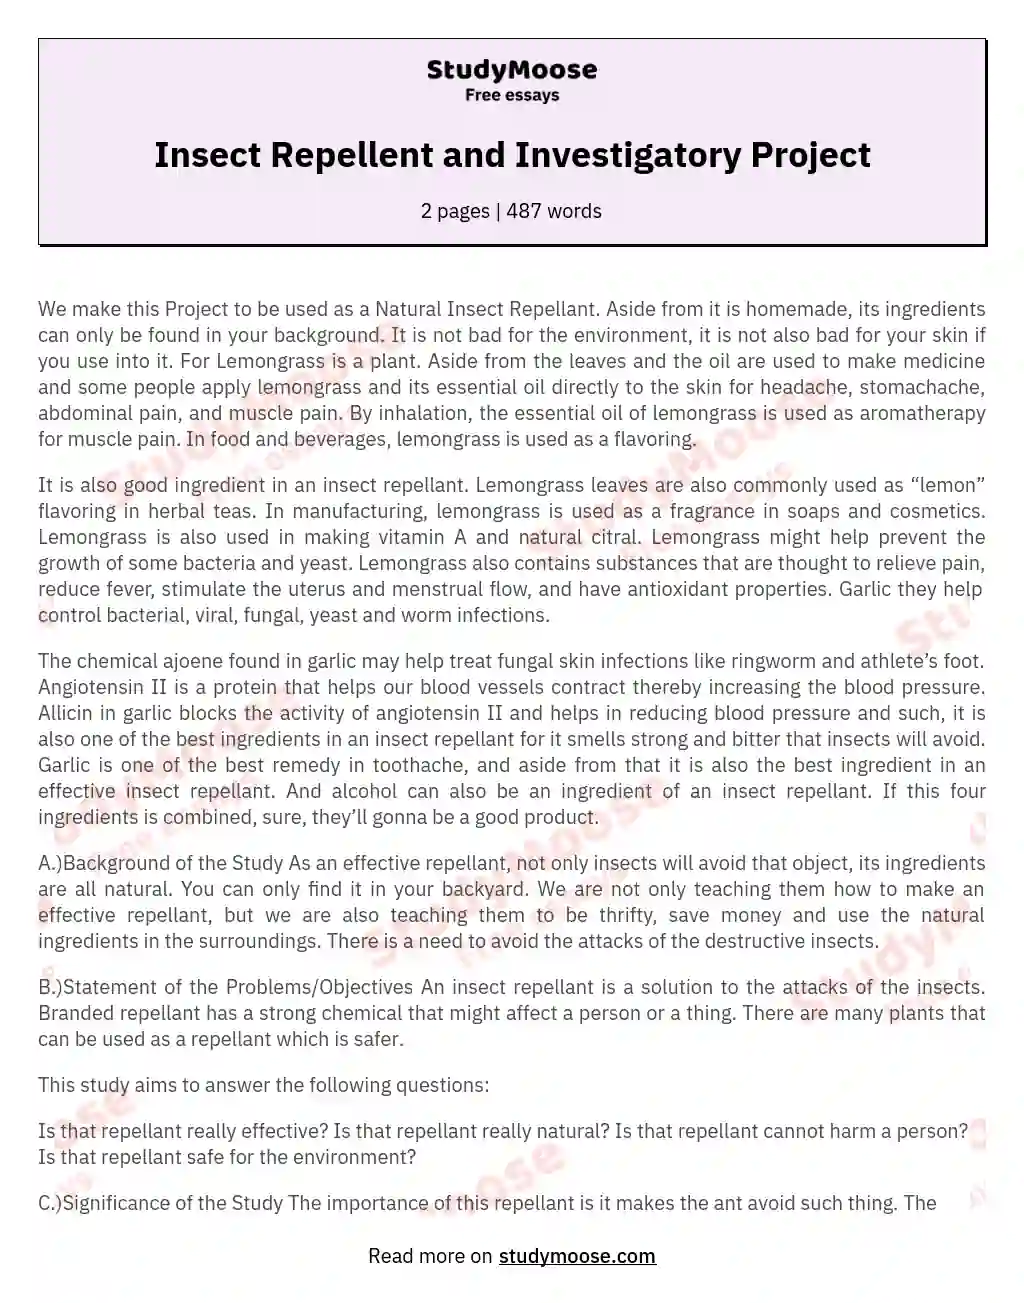 Insect Repellent and Investigatory Project essay